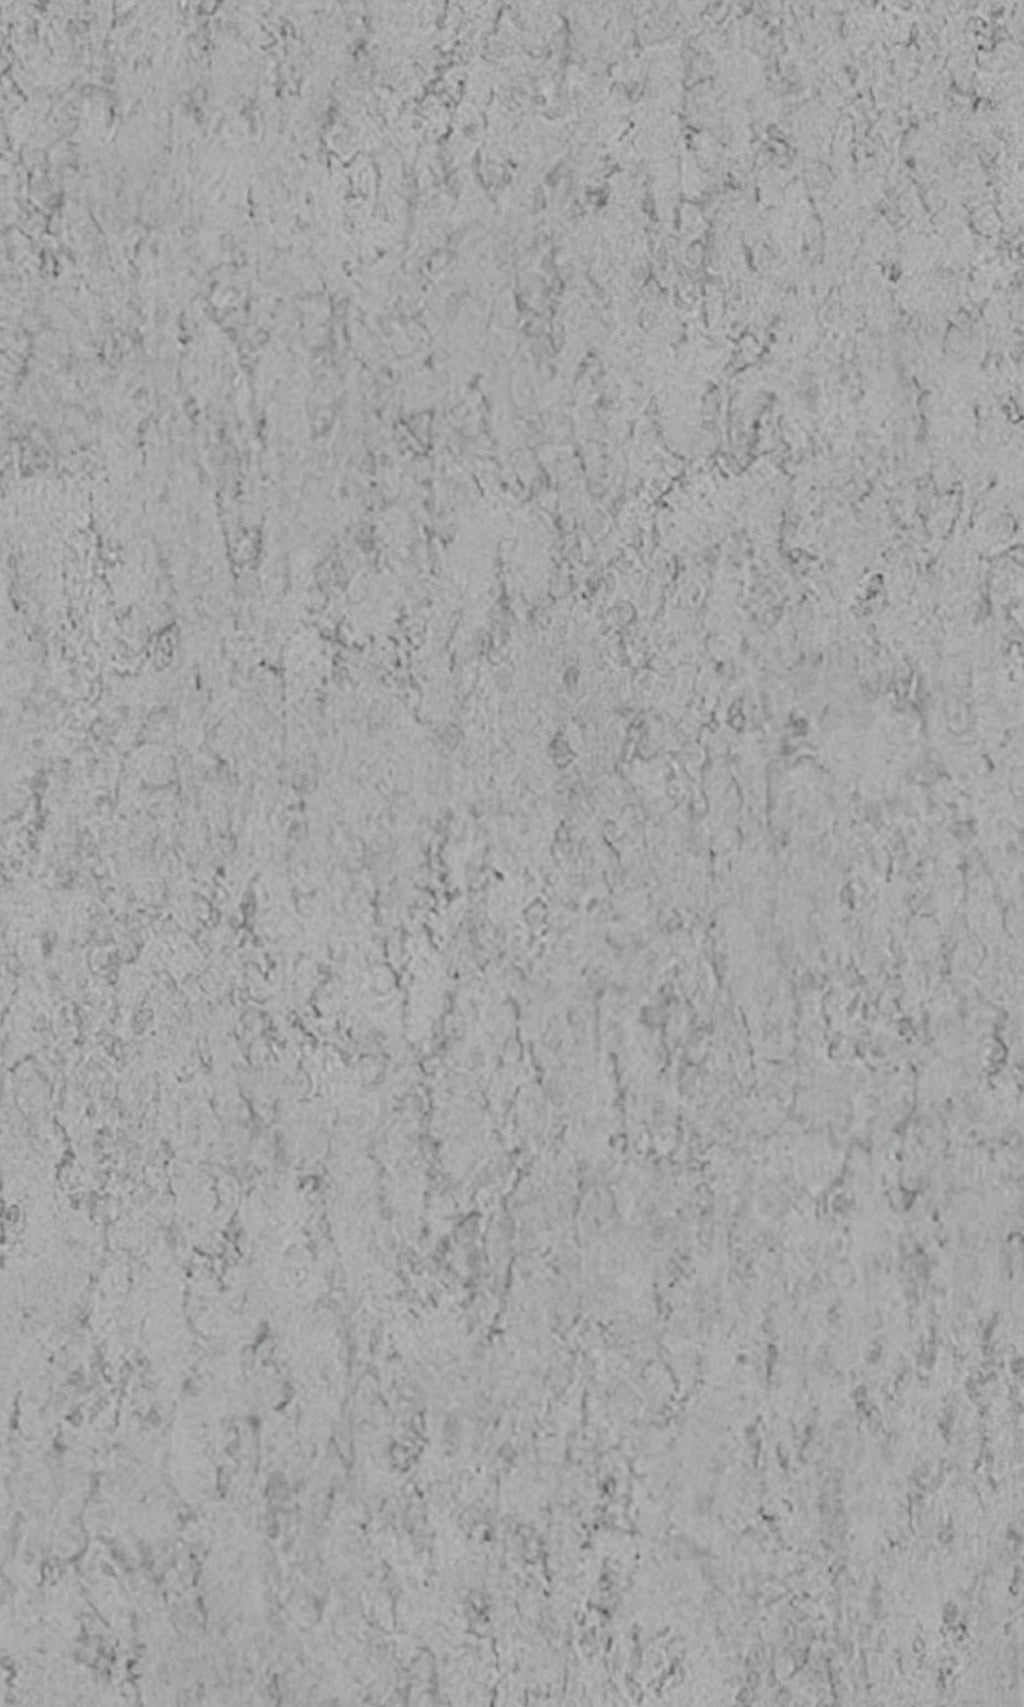 Moonstone Marble Like Textured Vinyl Commercial CPW1015